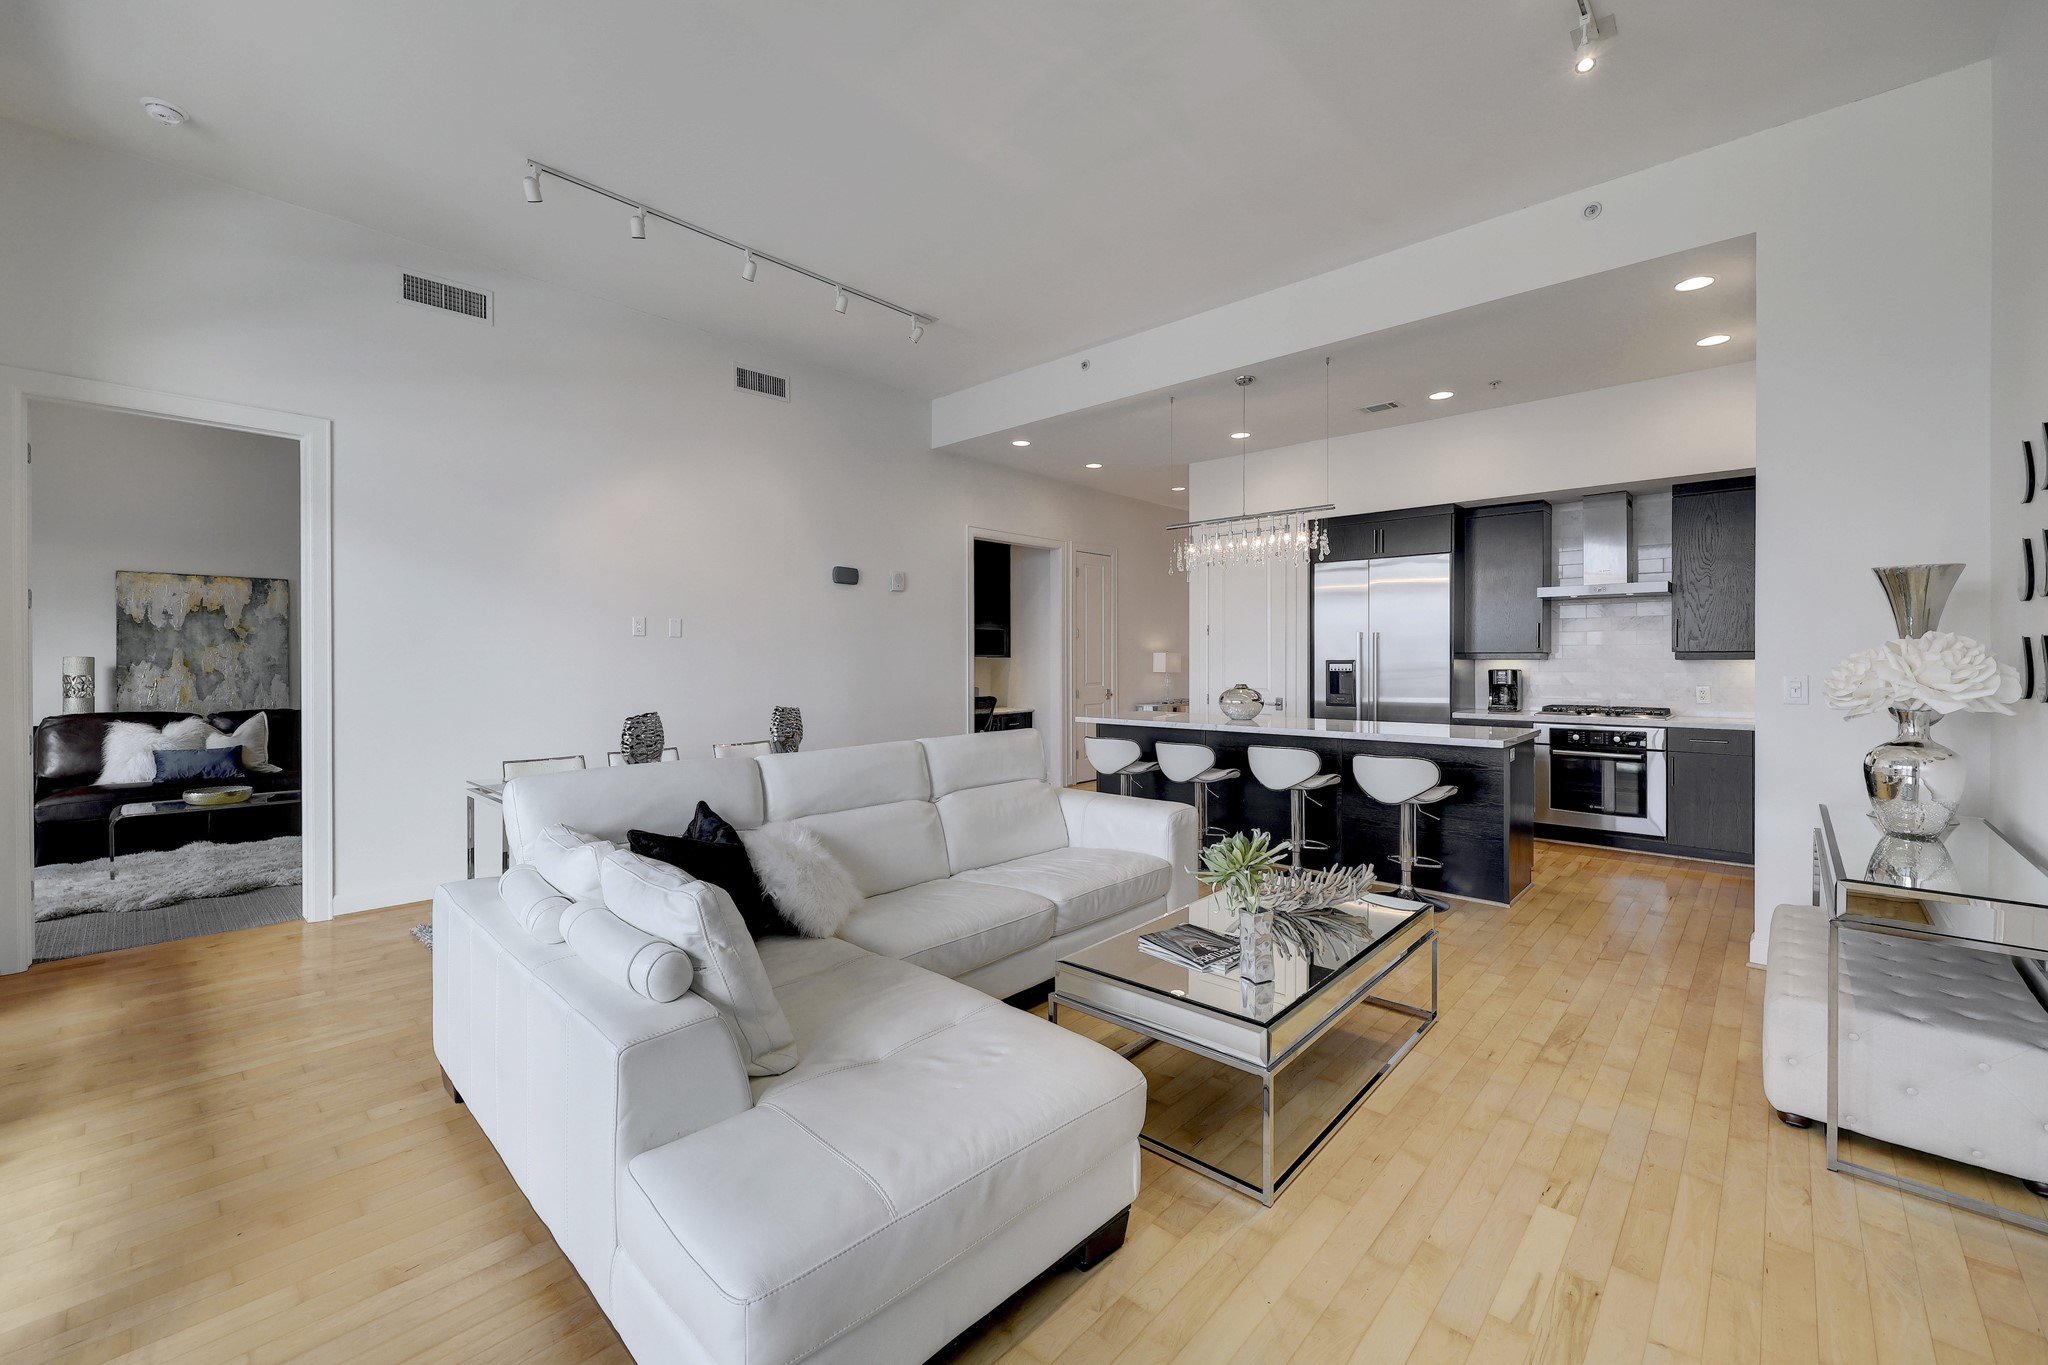 The space feels more spacious, open and airy with tall ceilings and large windows. The contemporary furnishings, basic kitchen essentials, washer, dryer and accessories are included. Staging accessories, art, furniture are excluded.